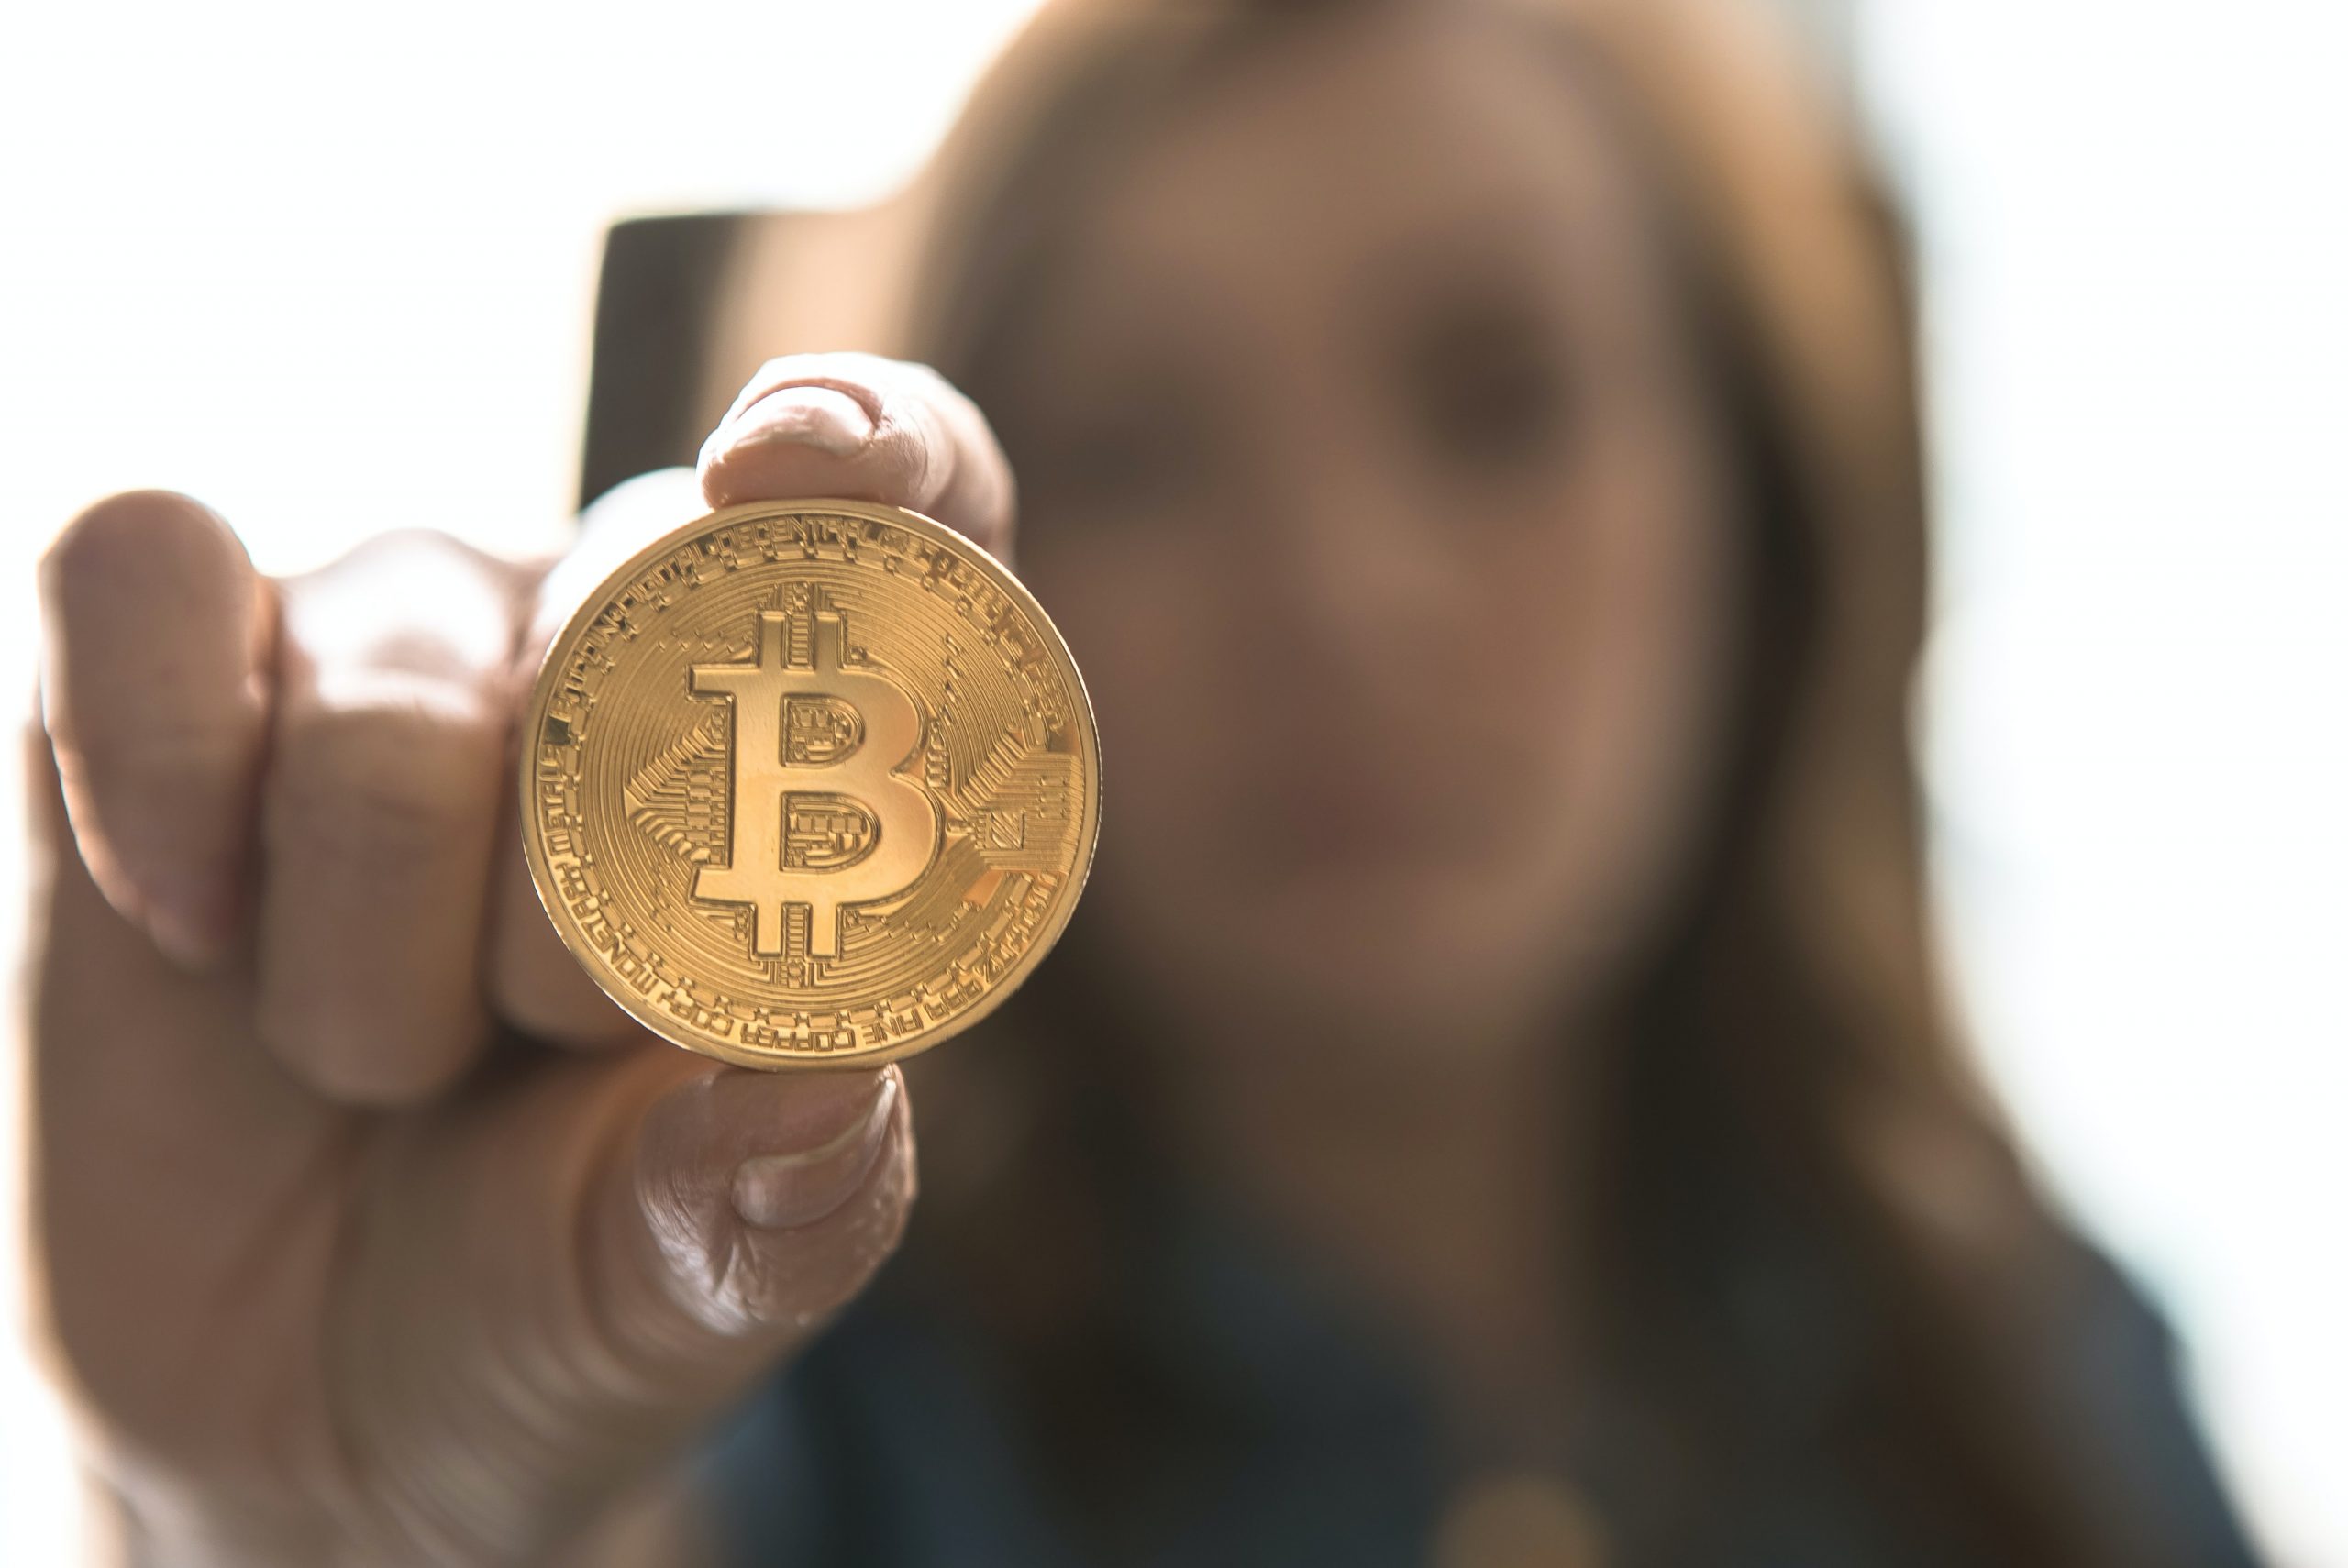 Analyst who predicted 2008 financial crisis: "Bitcoin is worth nothing"